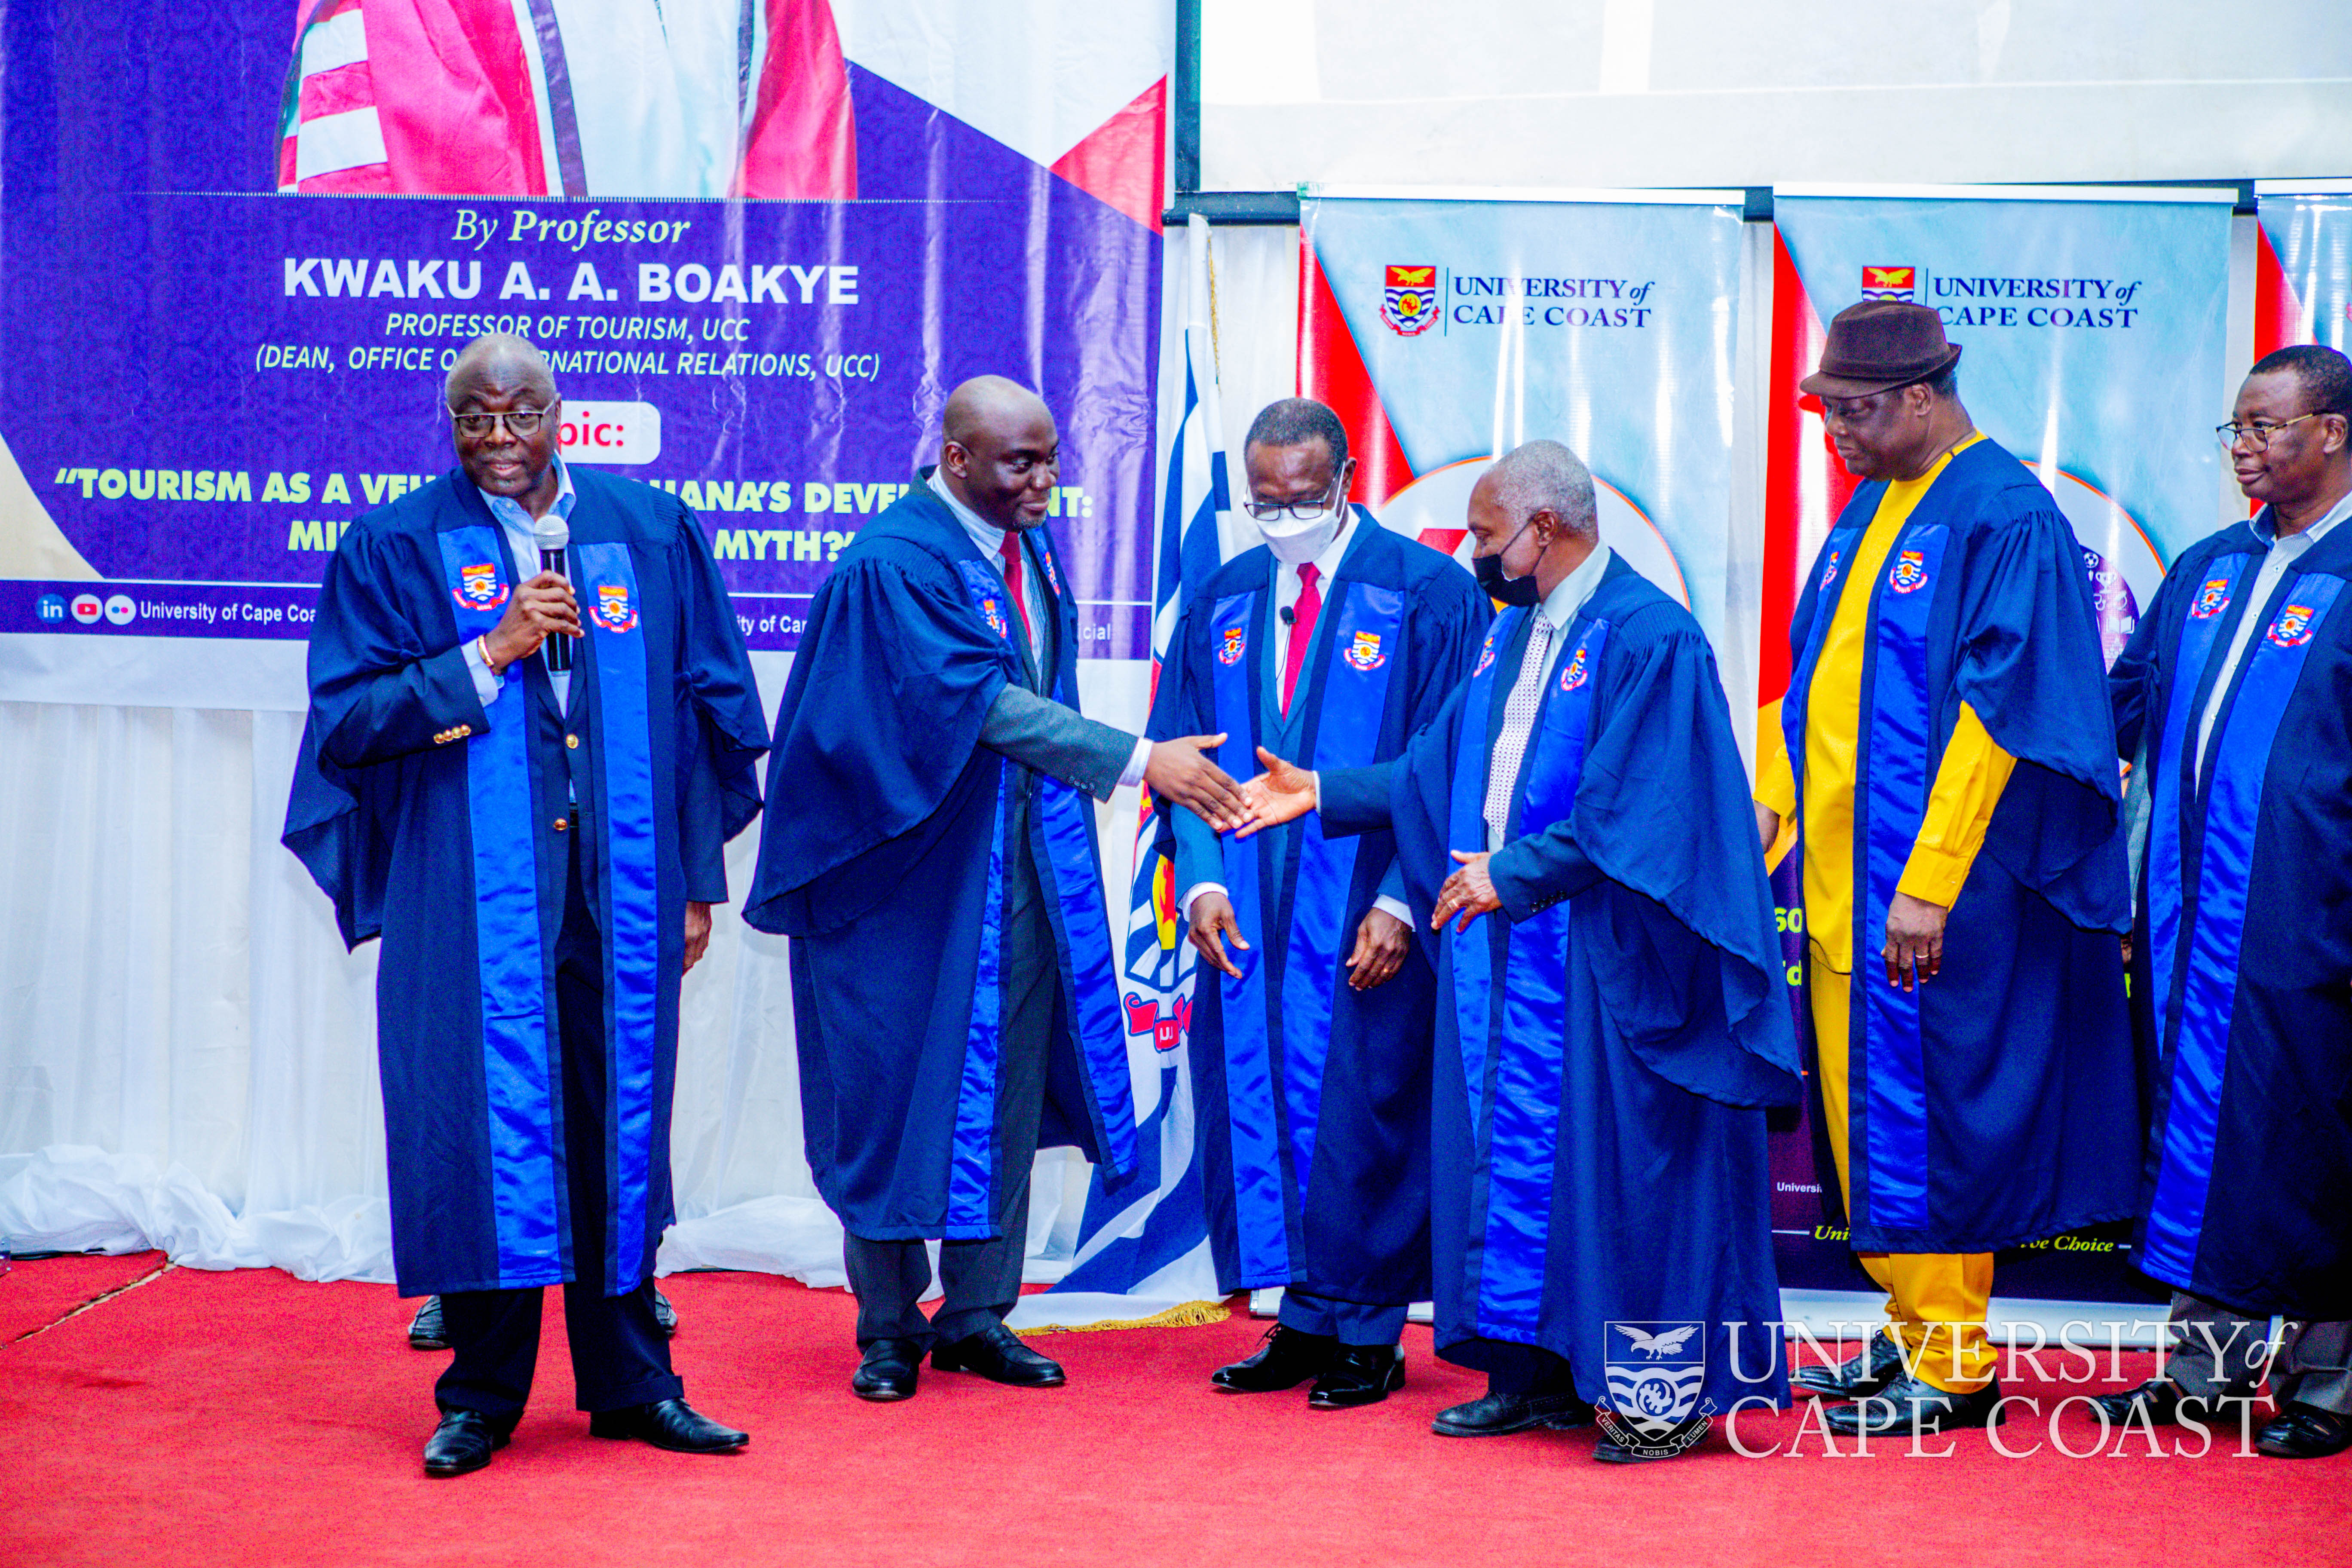 Prof. Boakye being congratulated by the College of Professors-UCC after being robed